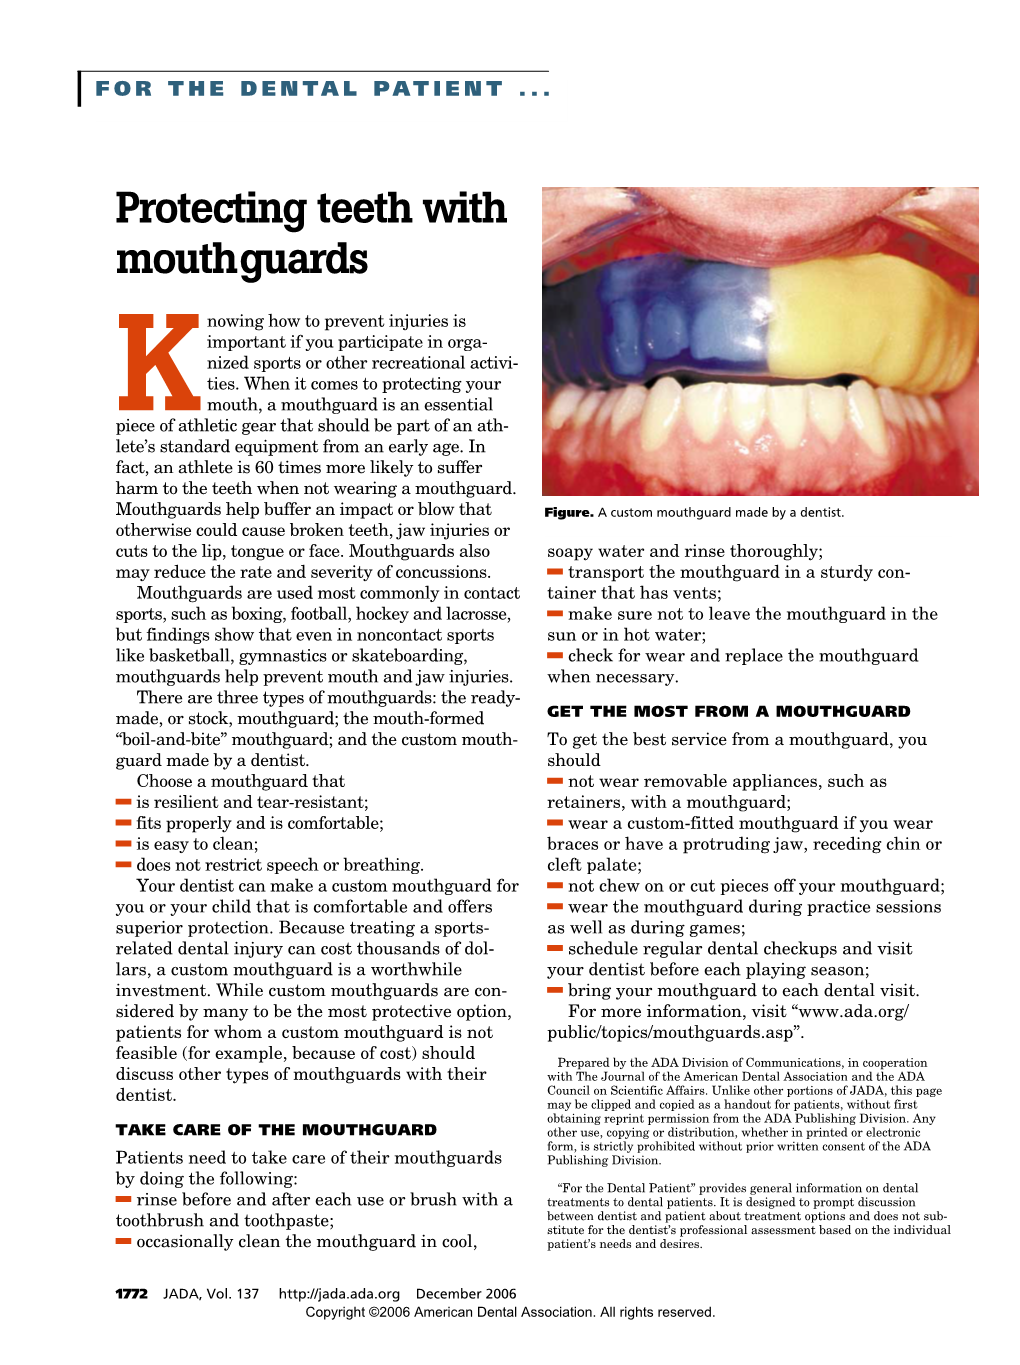 Protecting Teeth with Mouthguards